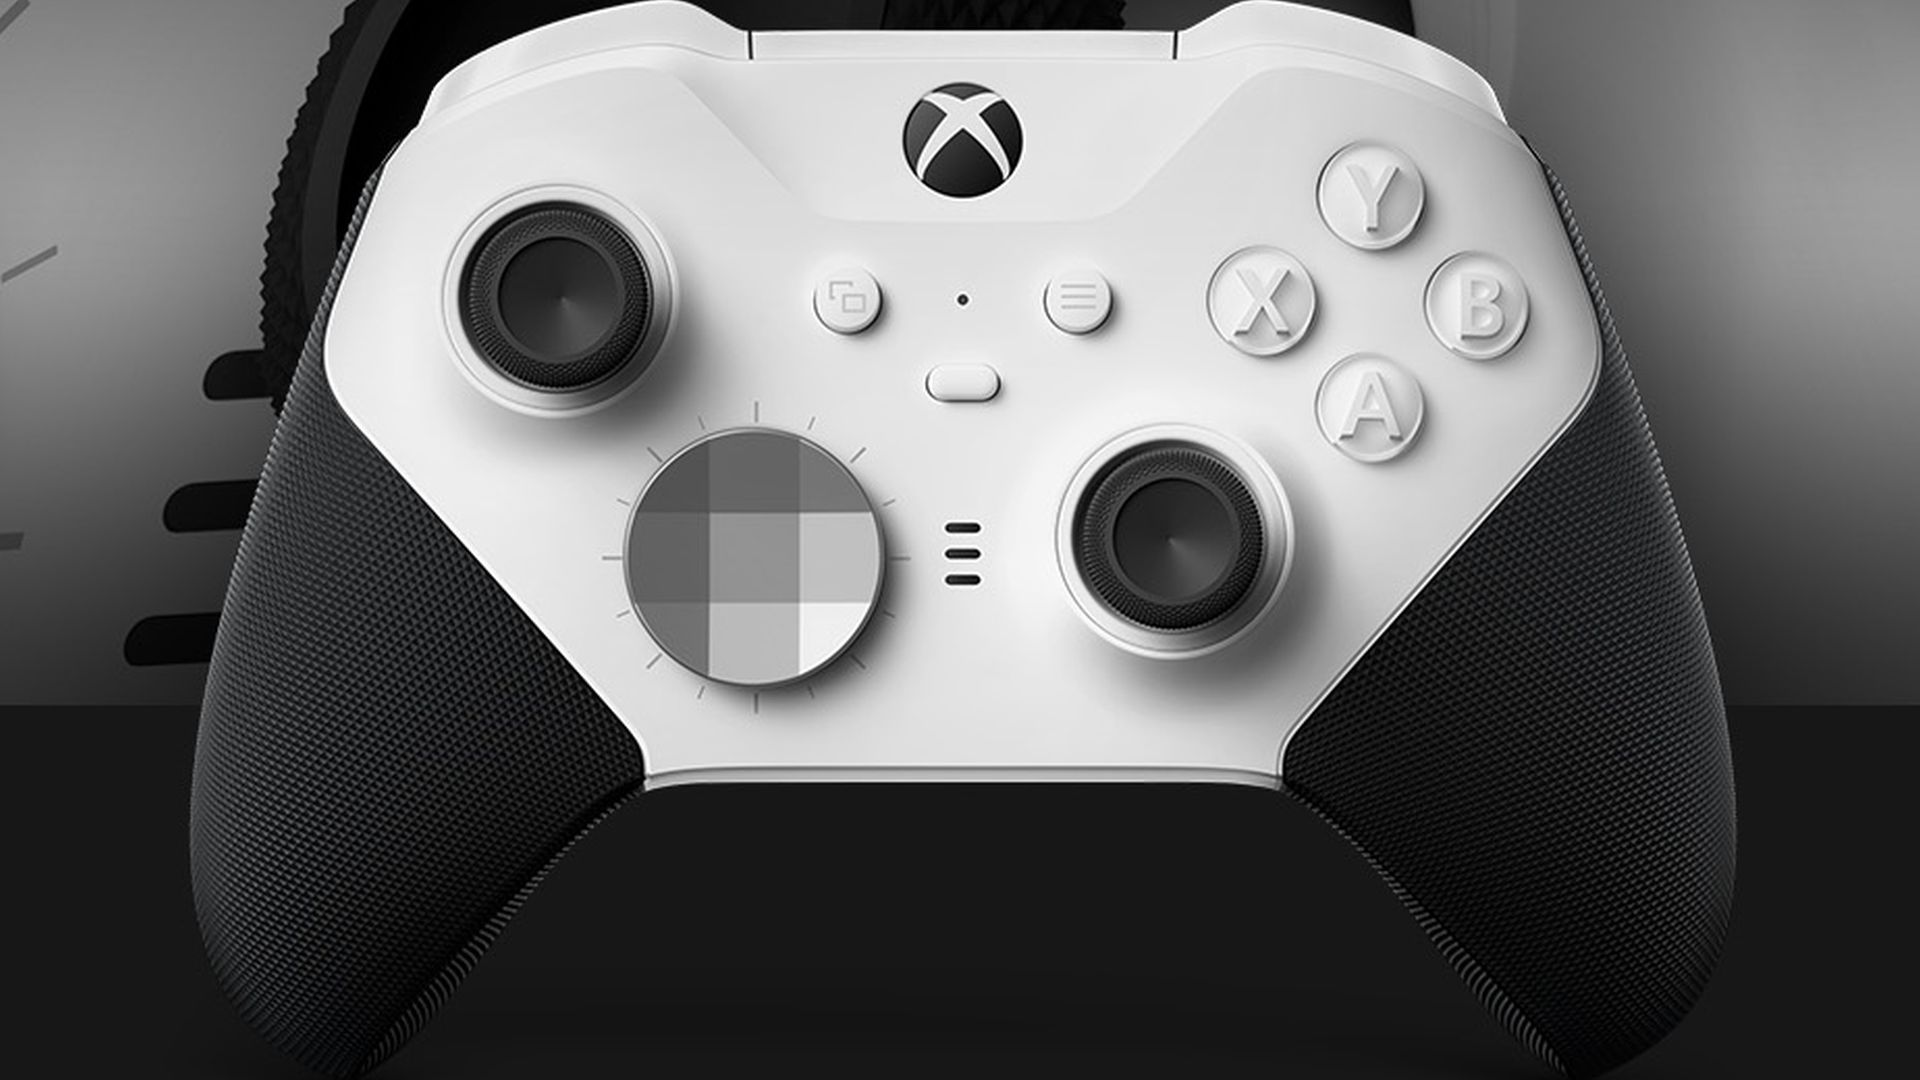 Xbox is Working on a New Controller with Haptic Feedback, as Per Leaked FTC Documents